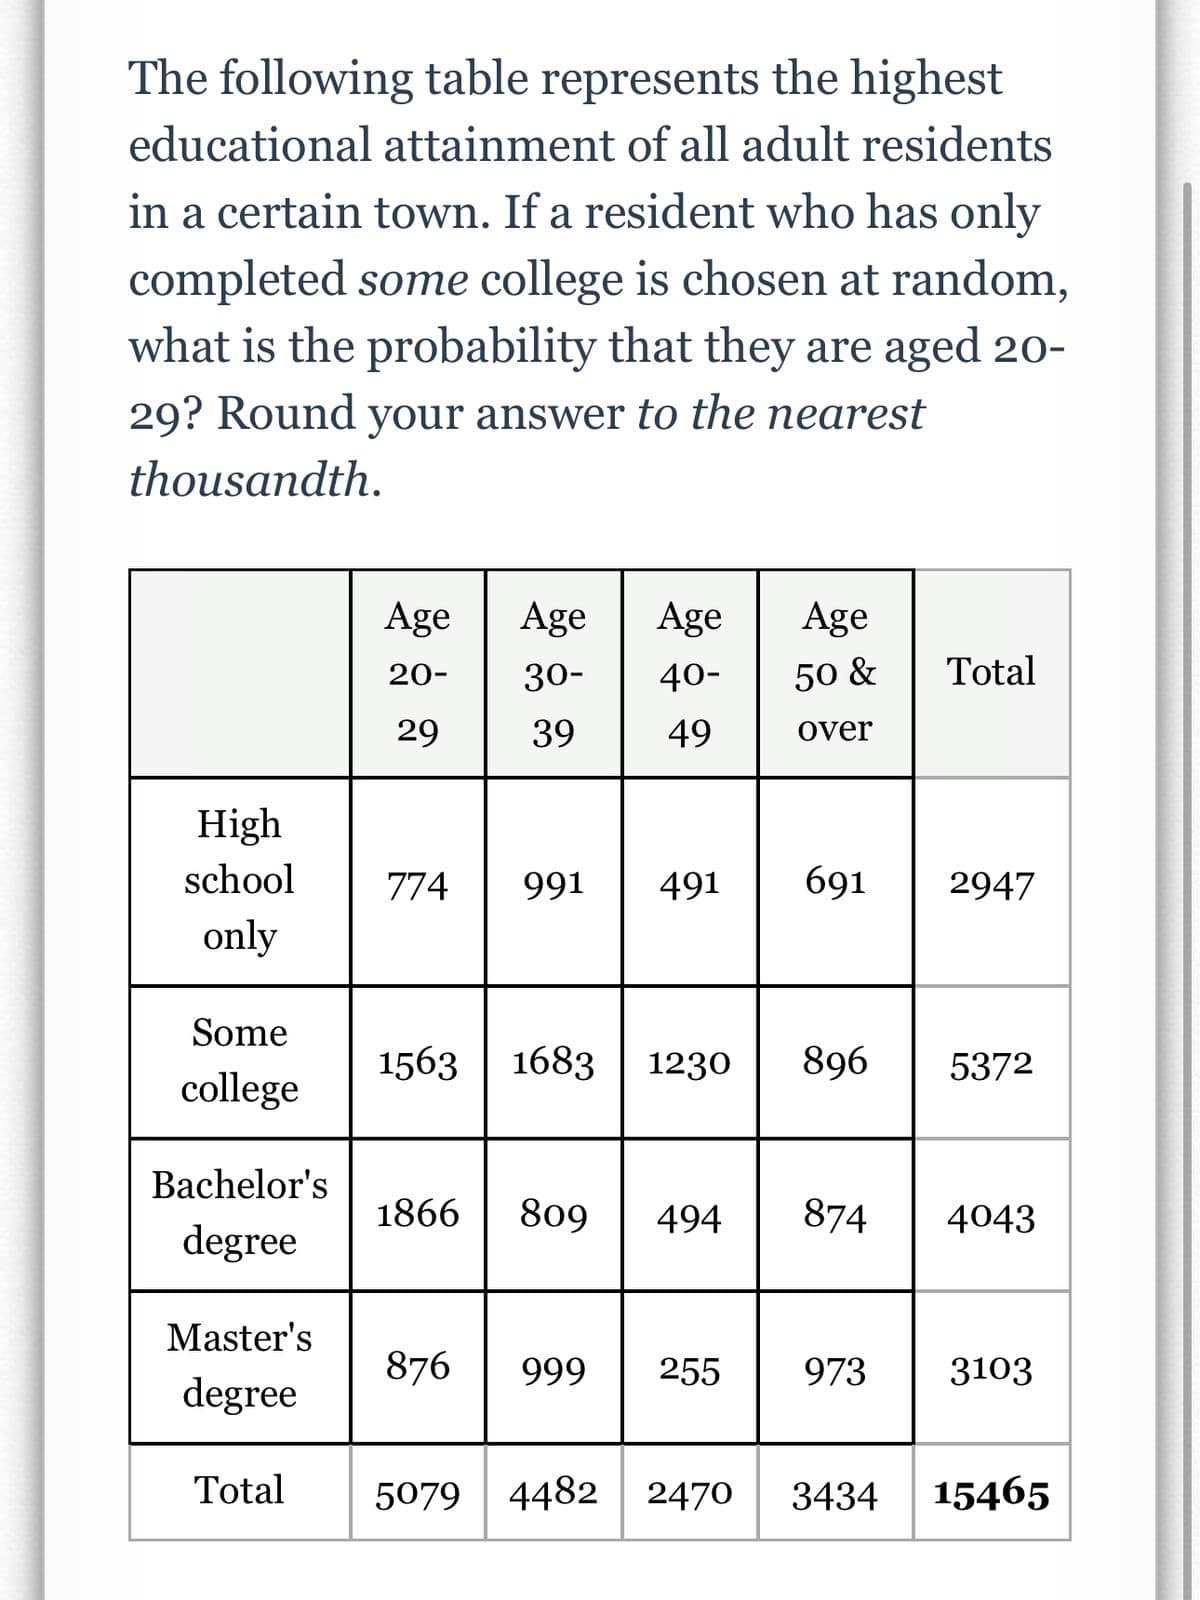 The following table represents the highest
educational attainment of all adult residents
in a certain town. If a resident who has only
completed some college is chosen at random,
what is the probability that they are aged 20-
29? Round your answer to the nearest
thousandth.
High
school
only
Some
college
Bachelor's
degree
Master's
degree
Total
Age
20-
29
Age Age Age
30-
40-
50 &
39
49
over
774 991 491 691 2947
1563 1683 1230 896 5372
1866 809 494
Total
874
5079 4482 2470
876 999 255 973 3103
3434
4043
15465